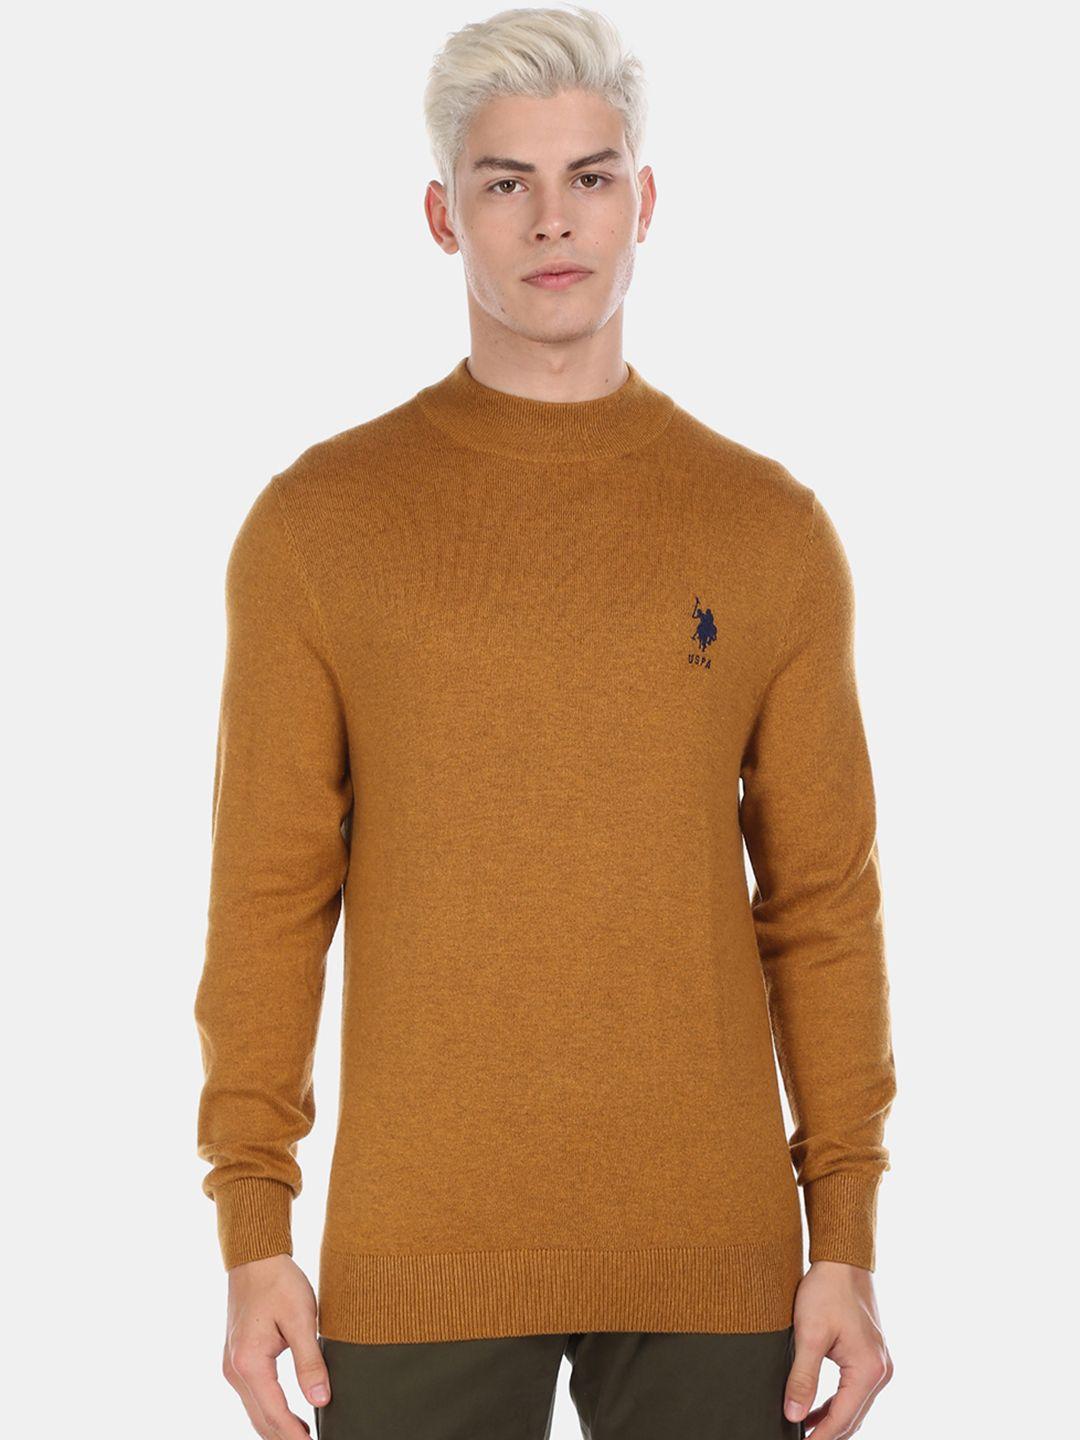 U.S. Polo Assn. Men Mustard Brown Solid Pullover Sweater